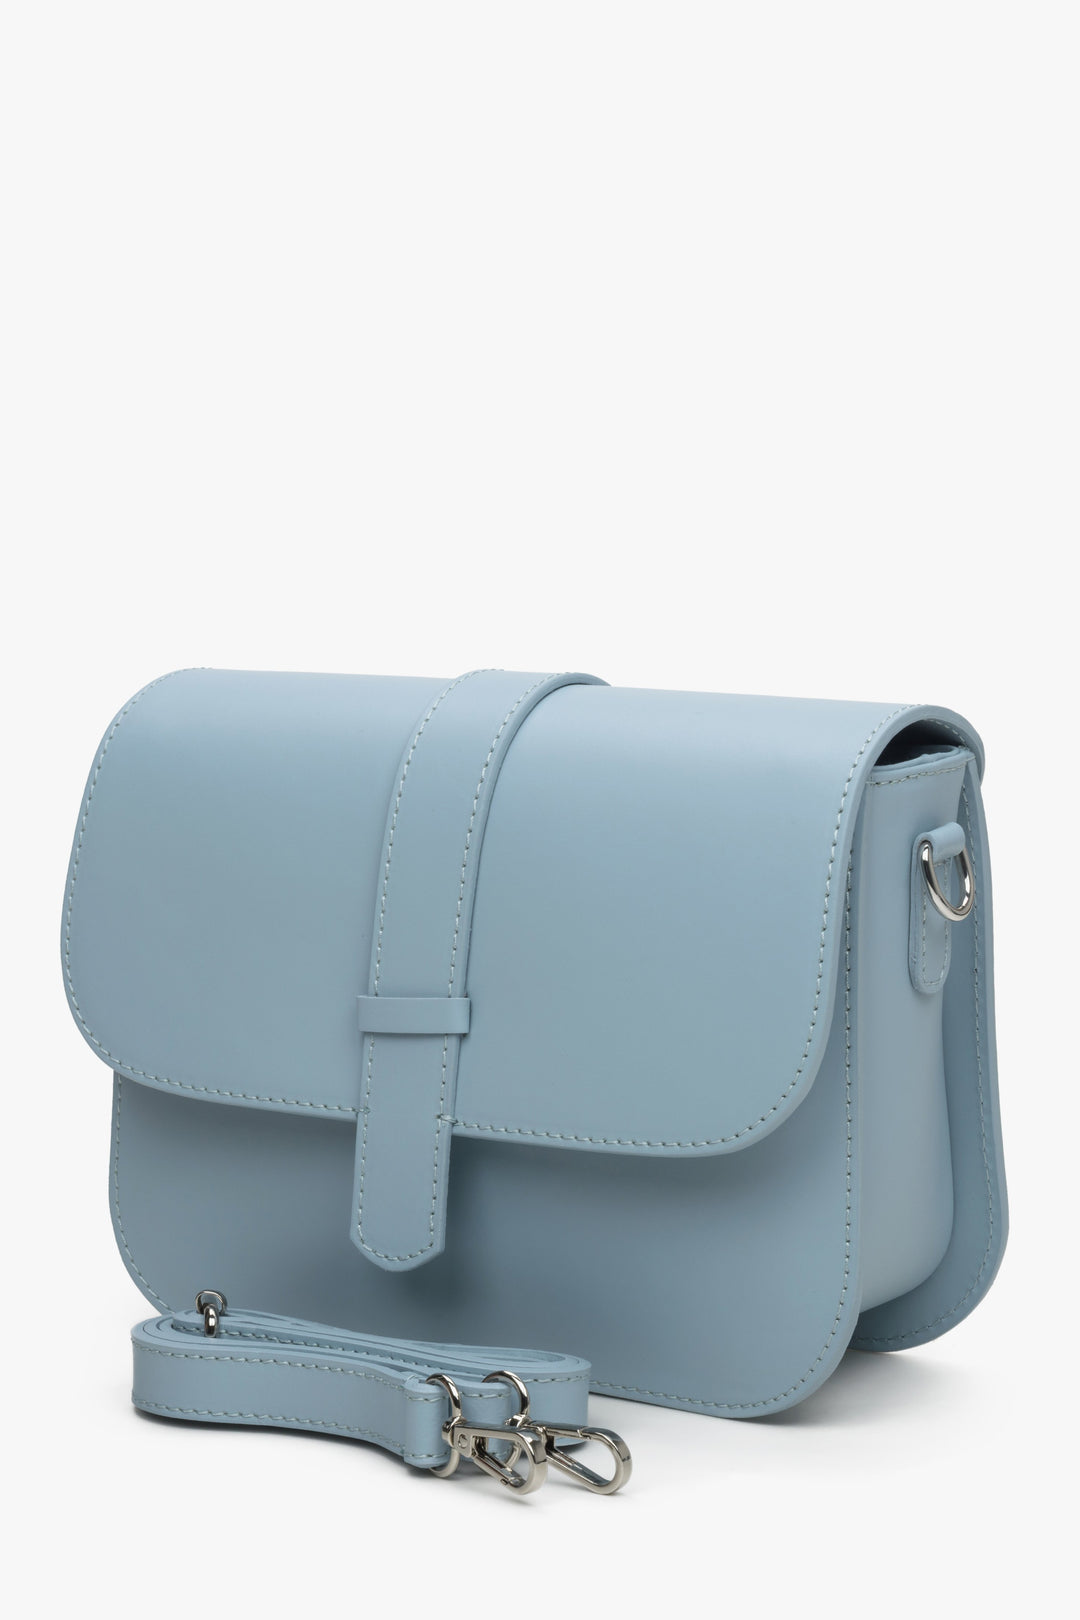 Women's blue leather handbag by Estro with silver fittings.